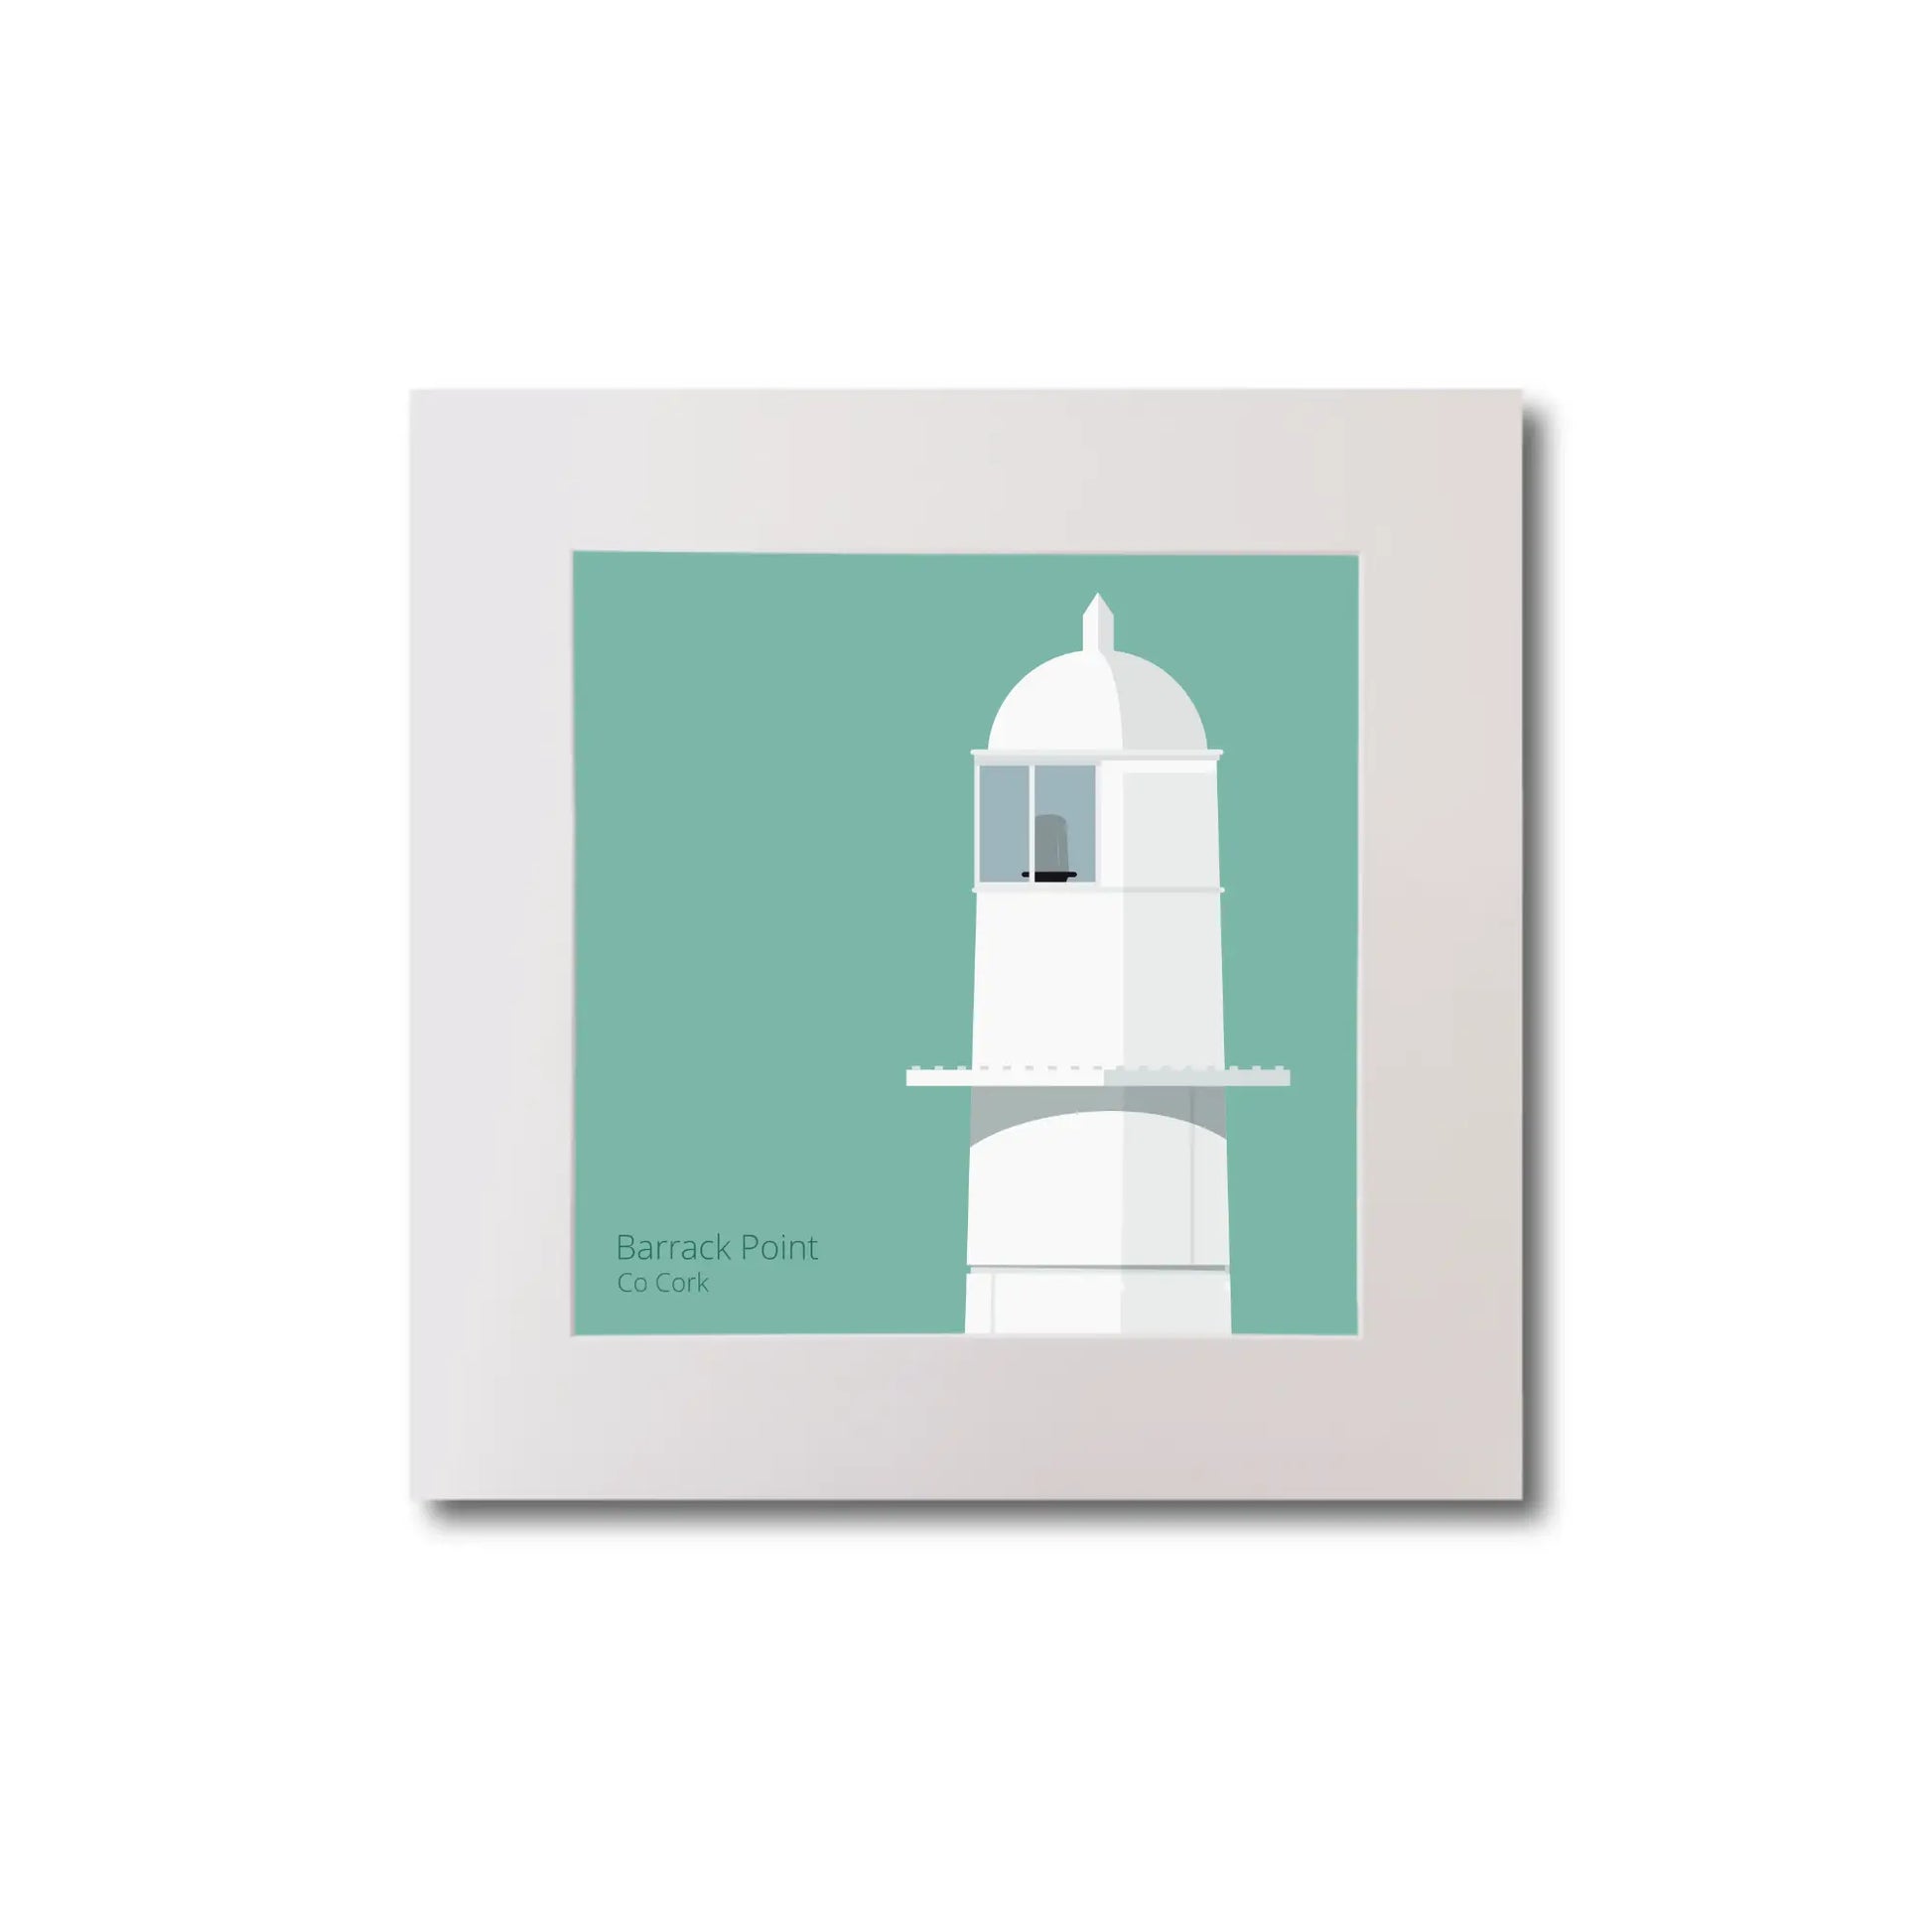 Illustration of Barrack_Point lighthouse on an ocean green background, mounted and measuring 20x20cm.